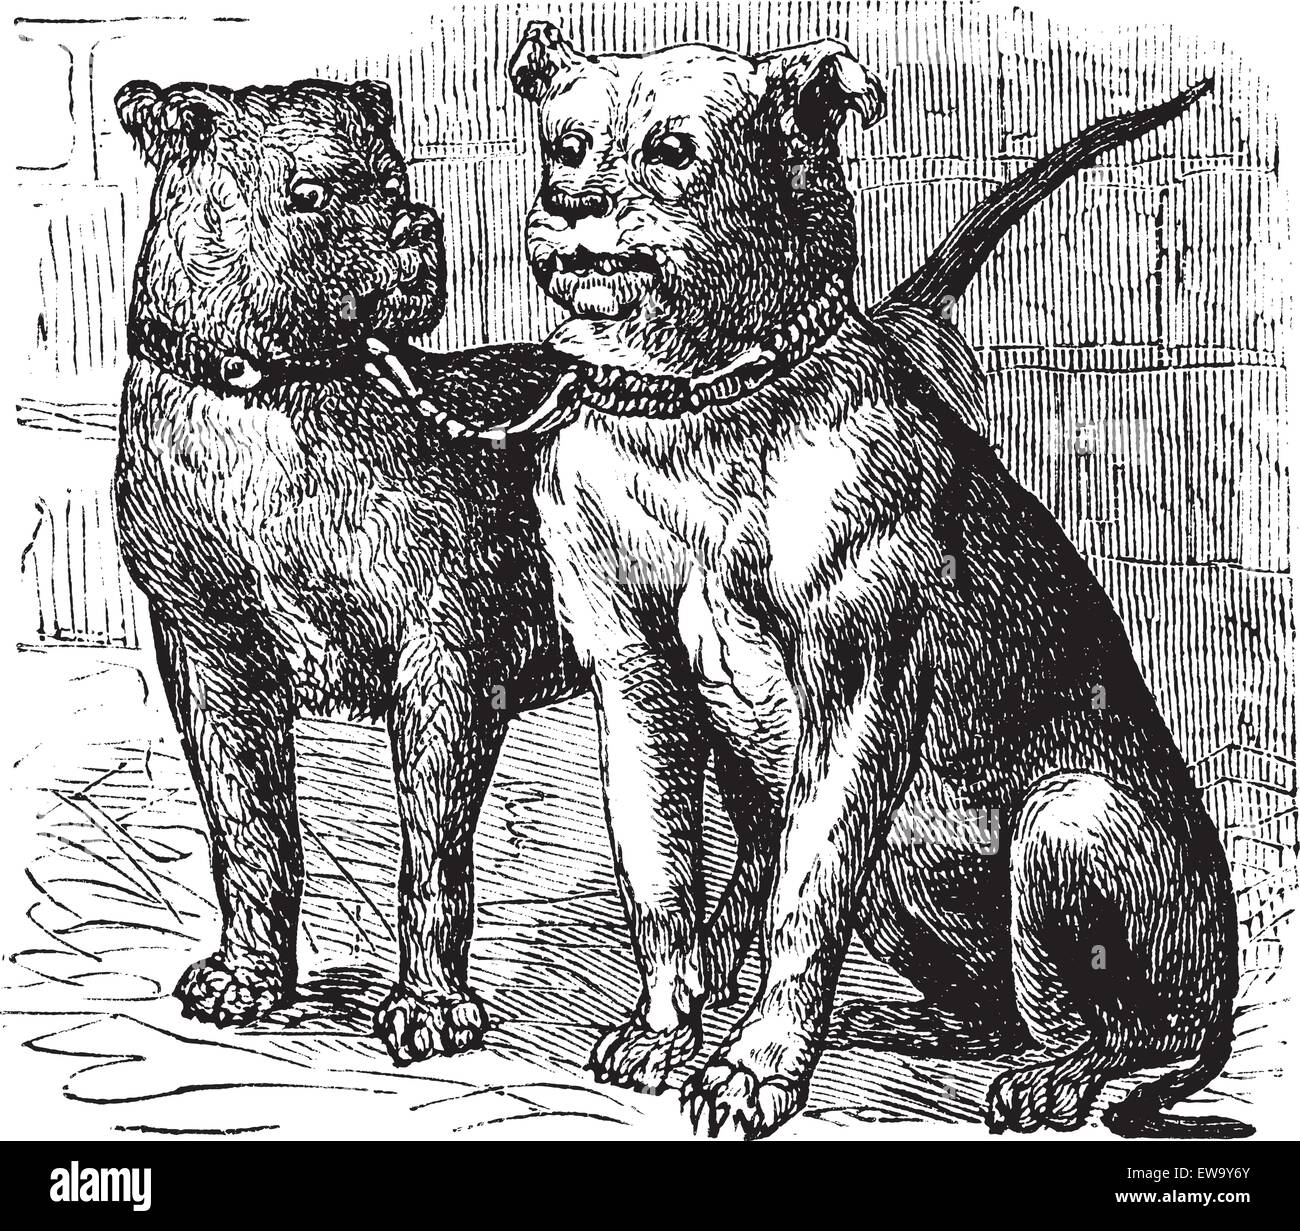 Bulldog or English Bulldog or British Bulldog or Canis lupus familiaris, vintage engraving. Old engraved illustration of Bulldog. Stock Vector